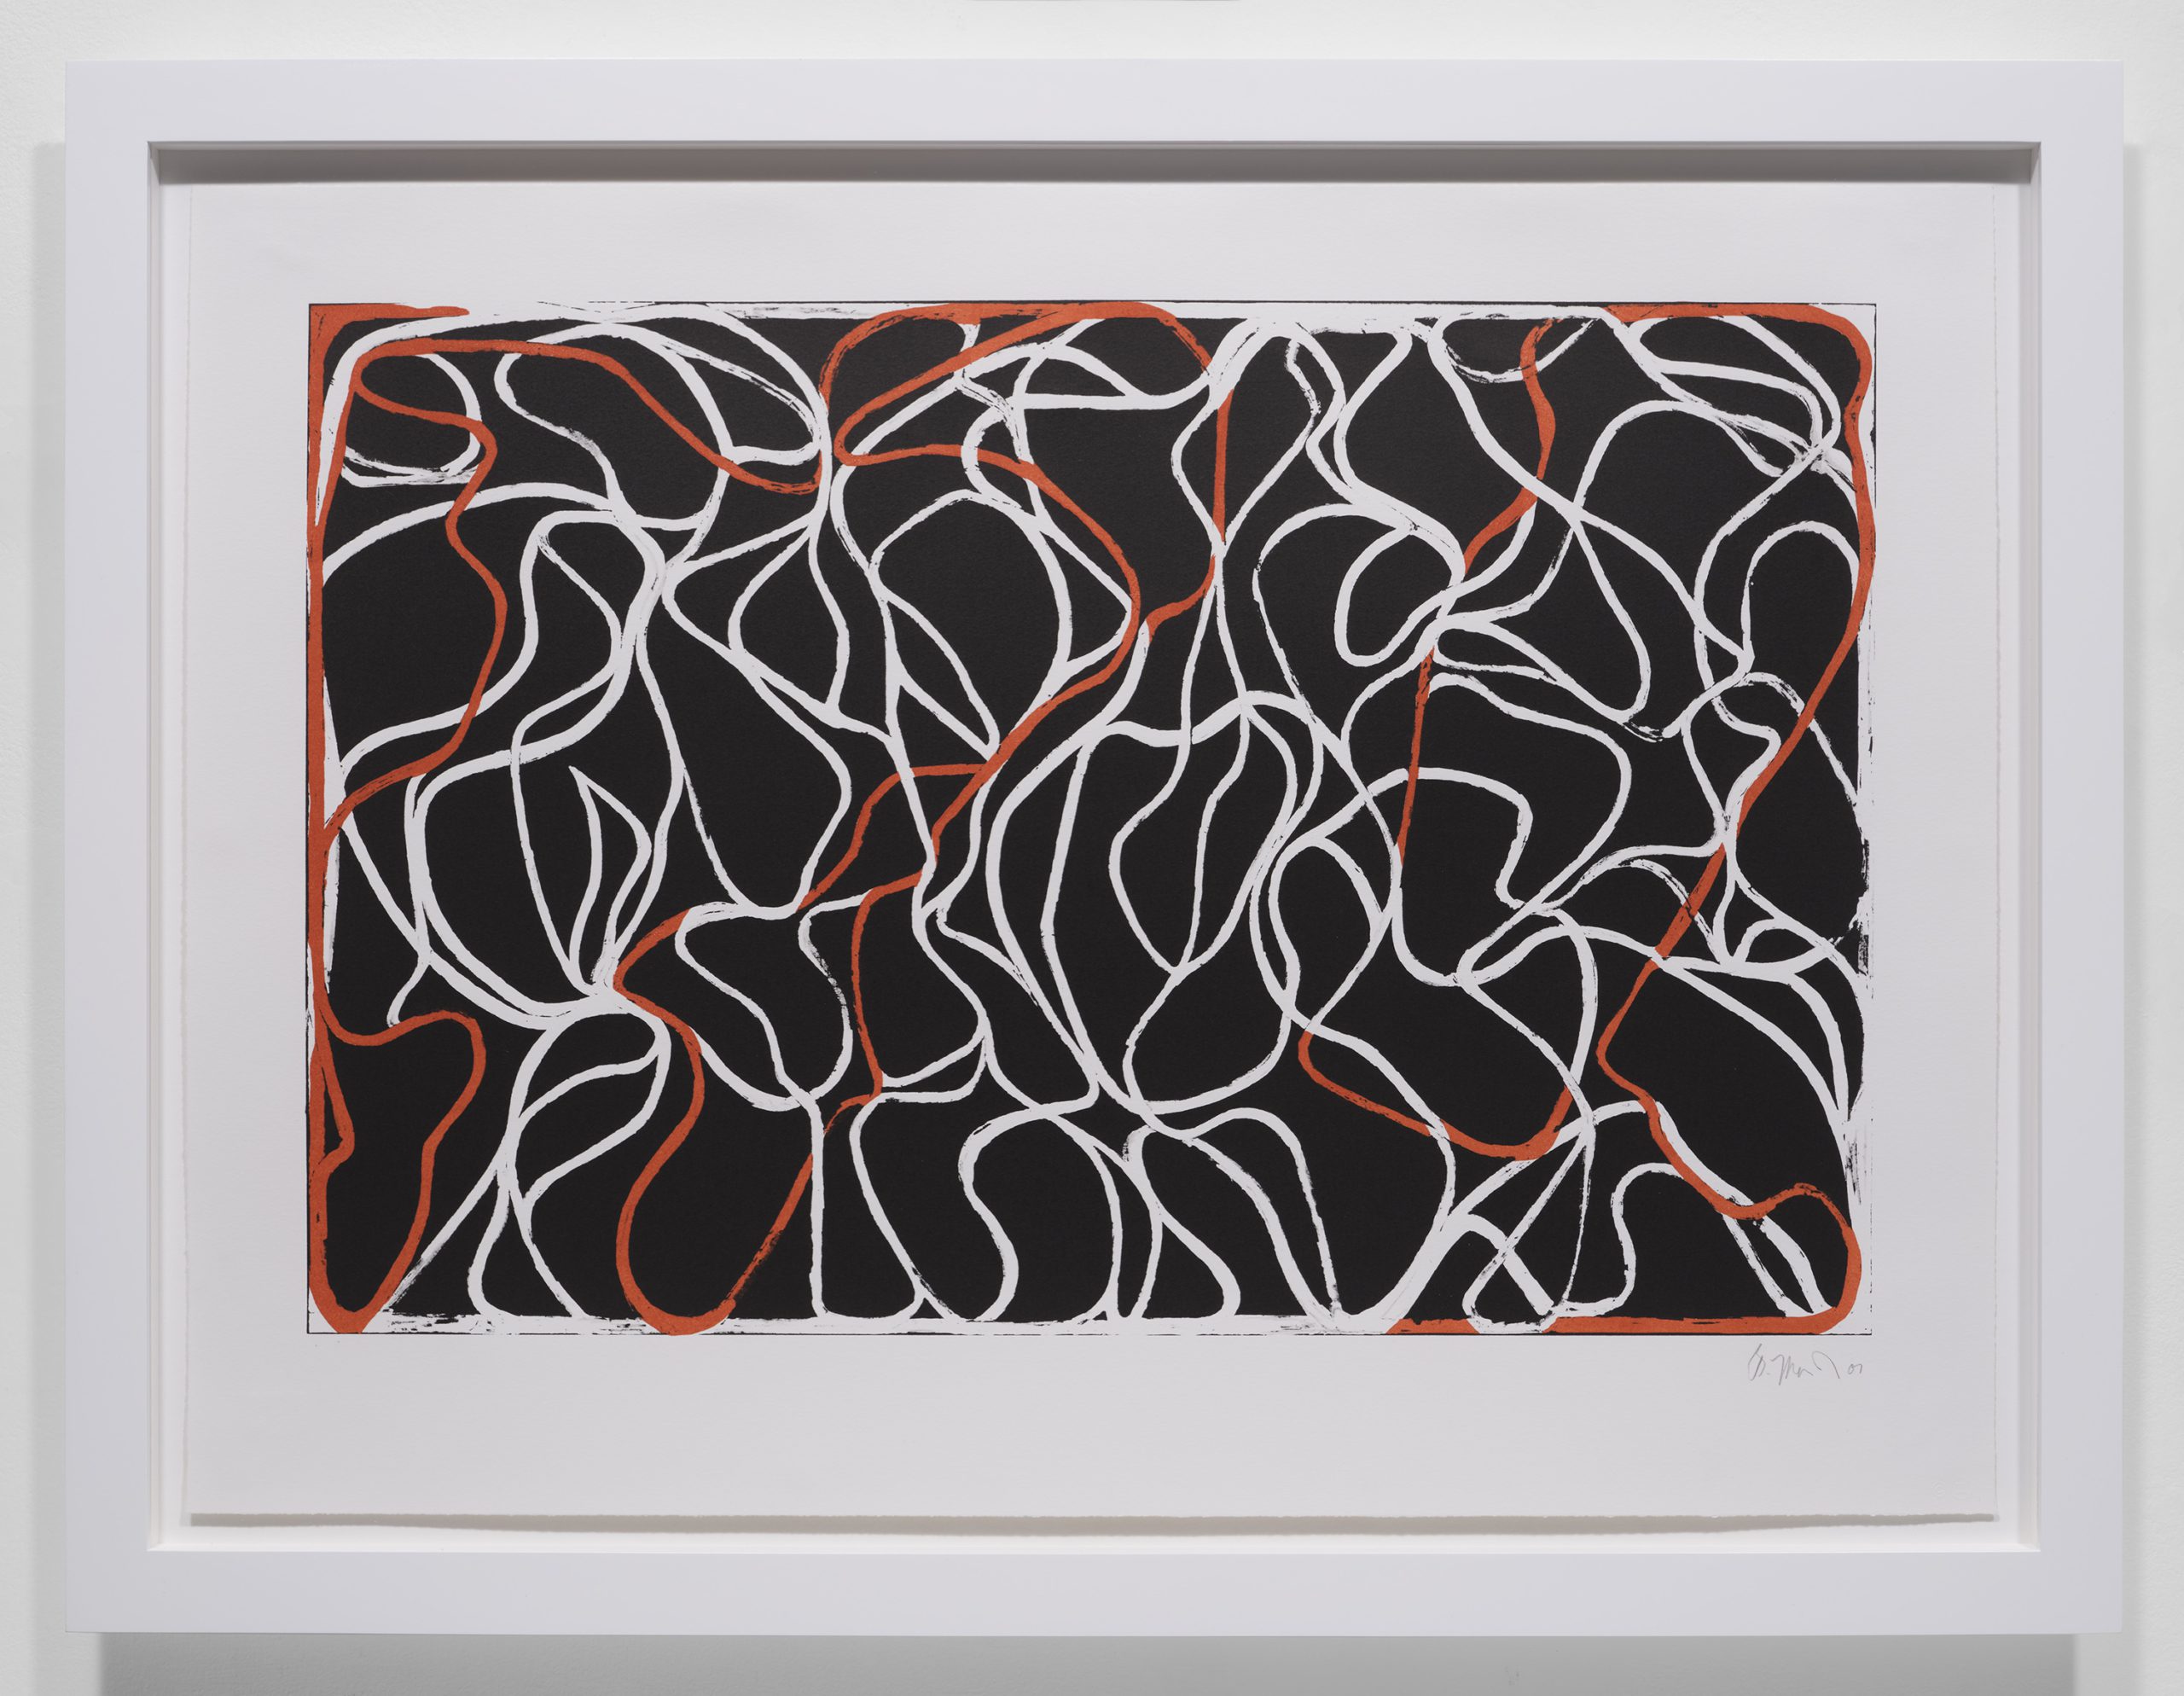 Richard’s Muse by Brice Marden